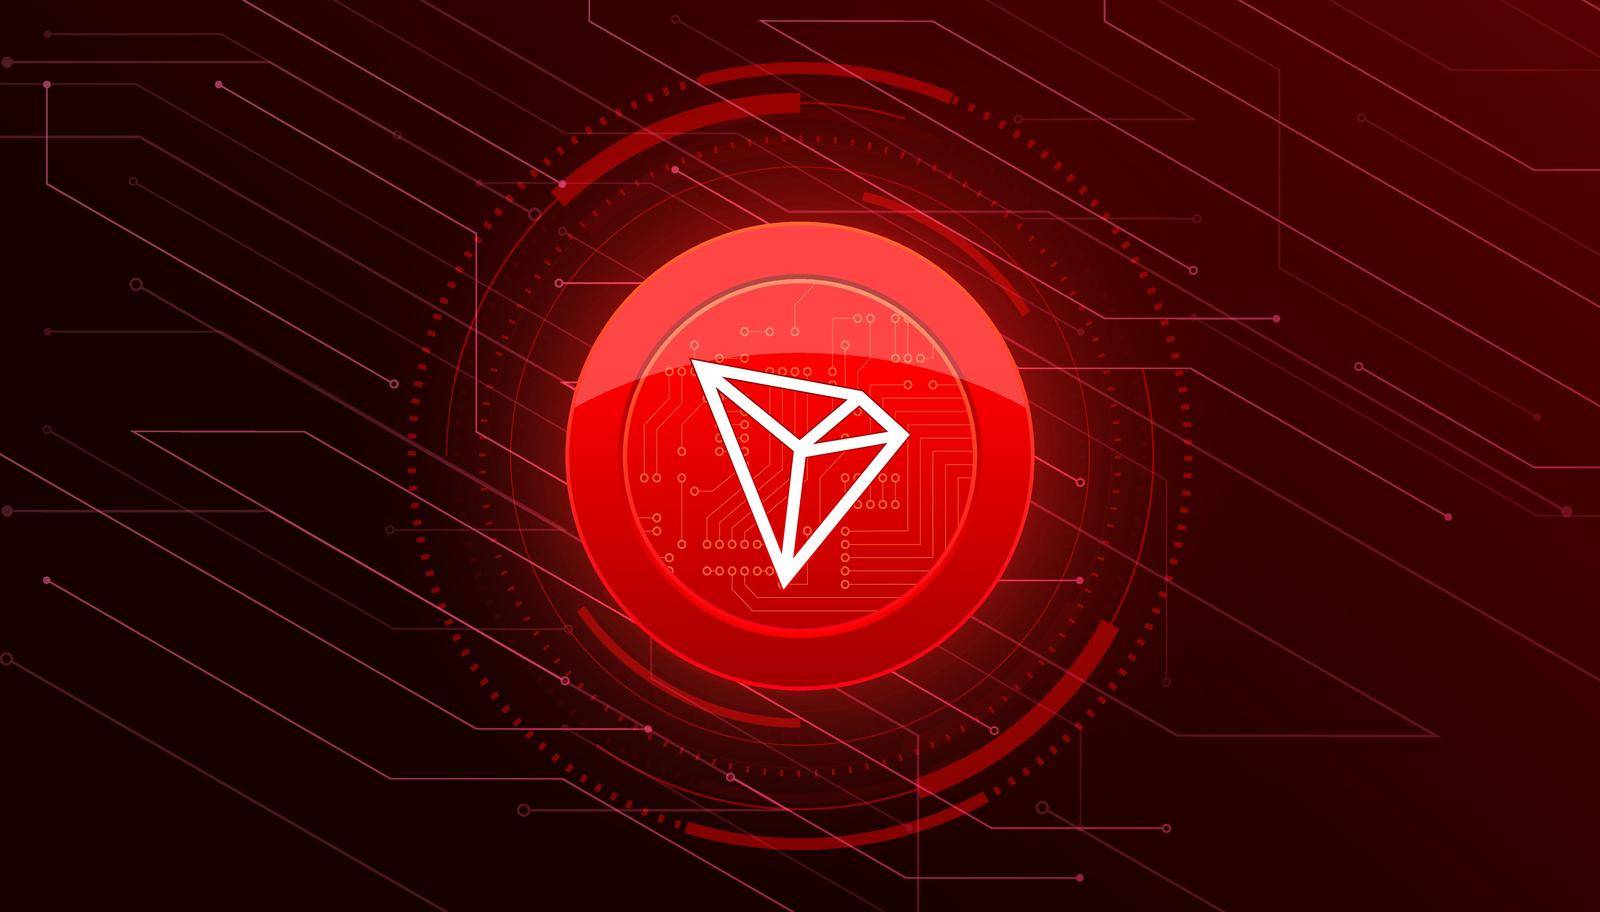 Tron (TRX) banner. TRX coin cryptocurrency concept banner background.